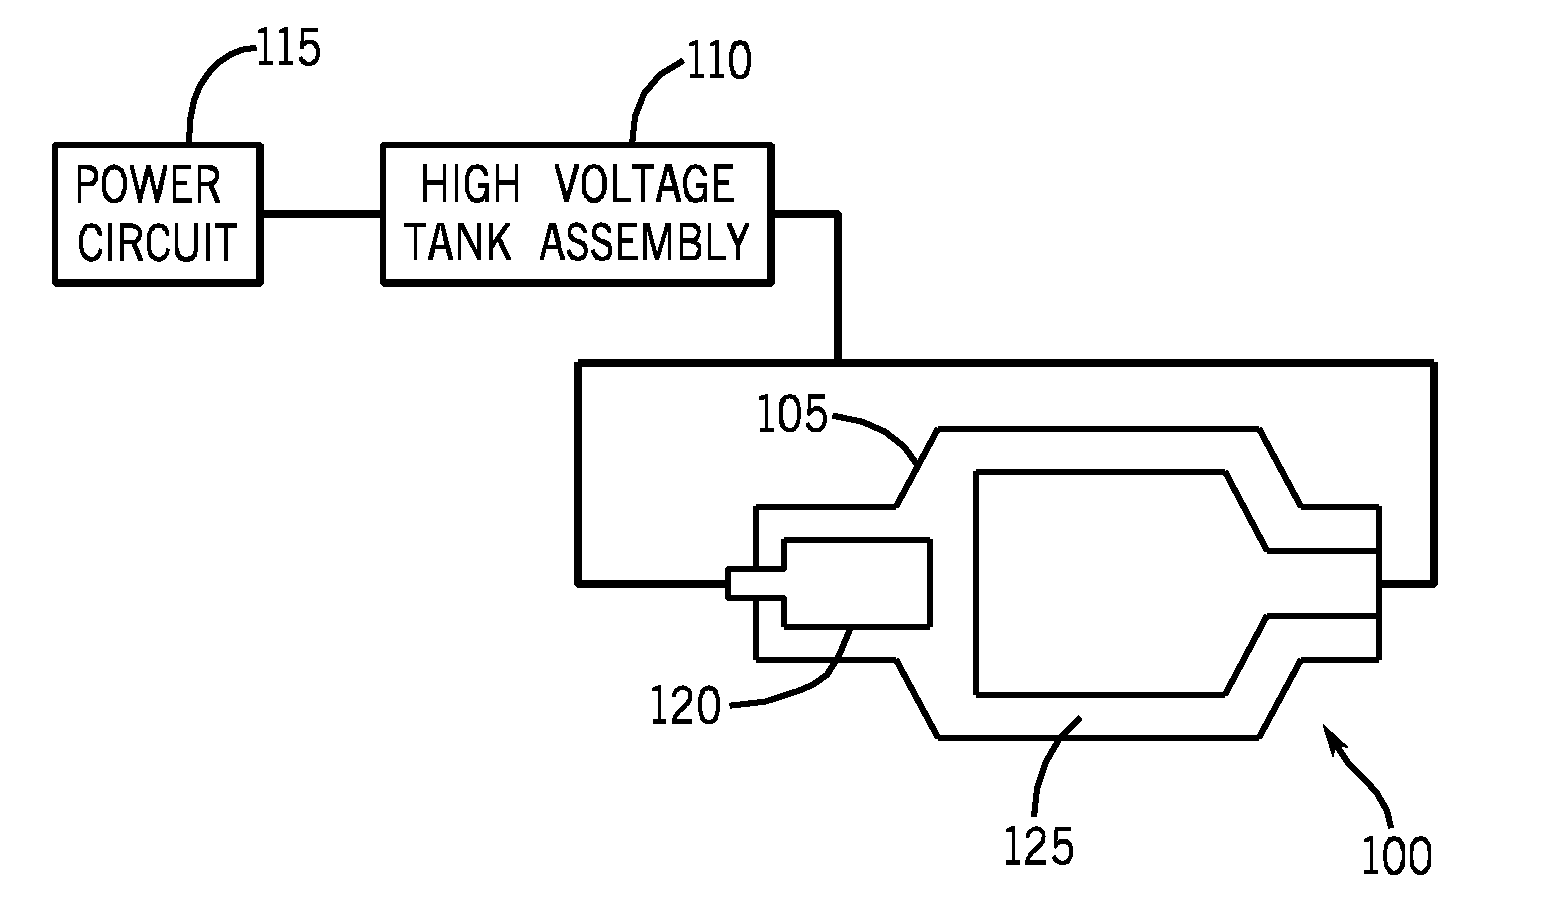 High voltage tank assembly for radiation generator